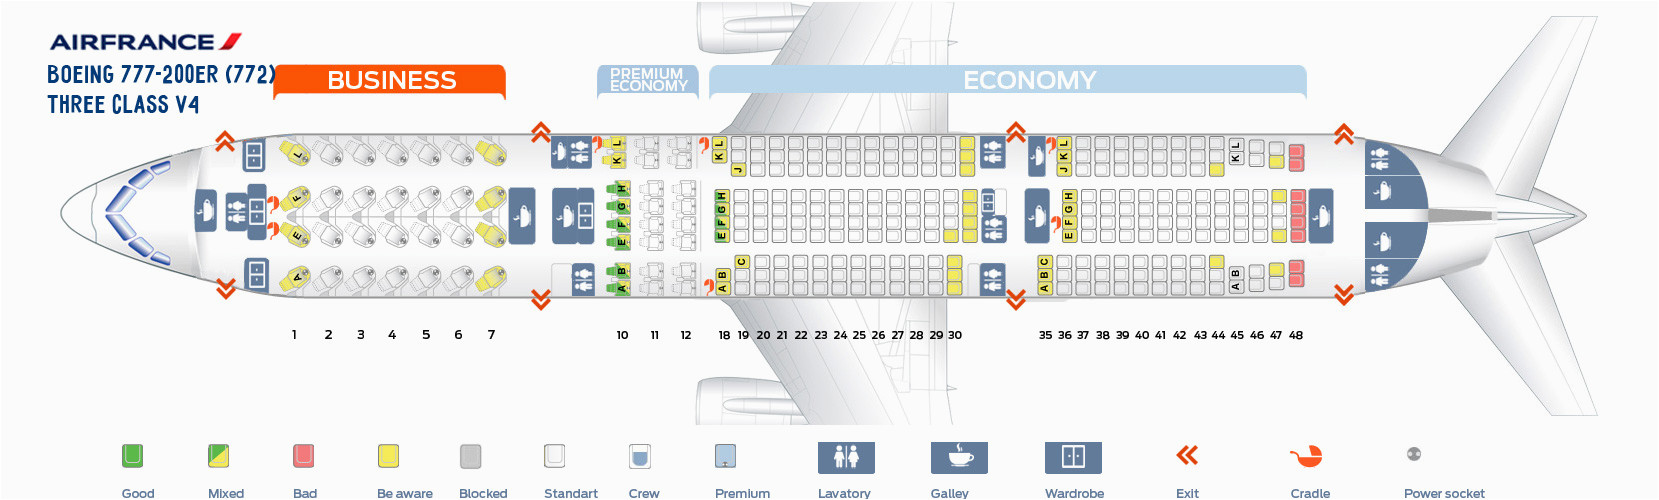 boeing 777 200er seat map air france review home decor